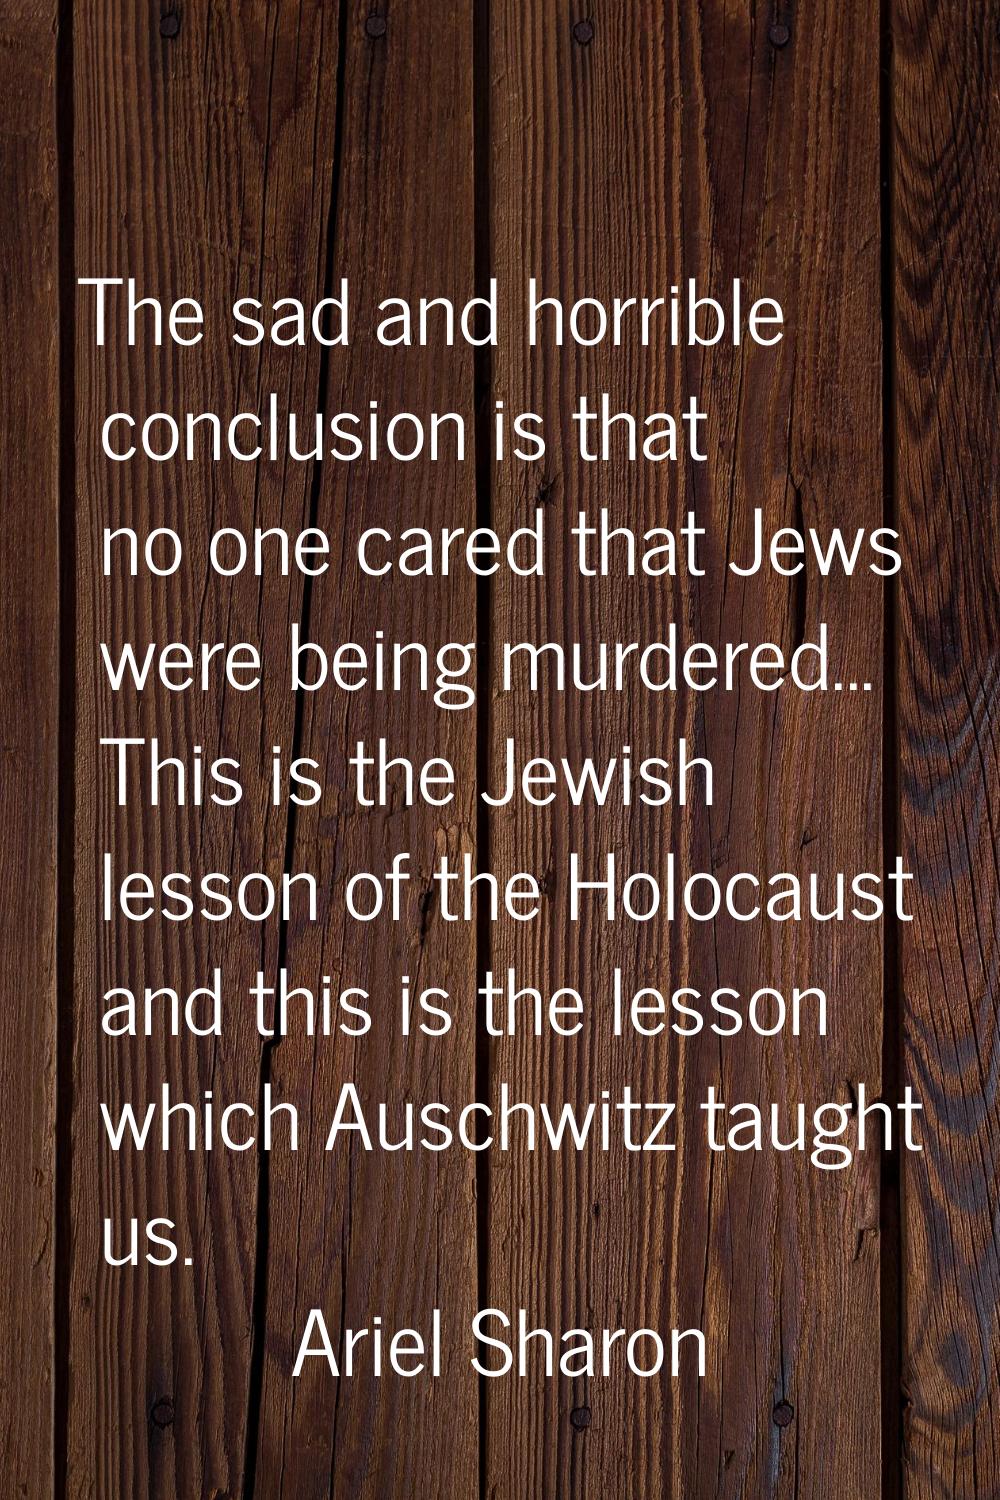 The sad and horrible conclusion is that no one cared that Jews were being murdered... This is the J